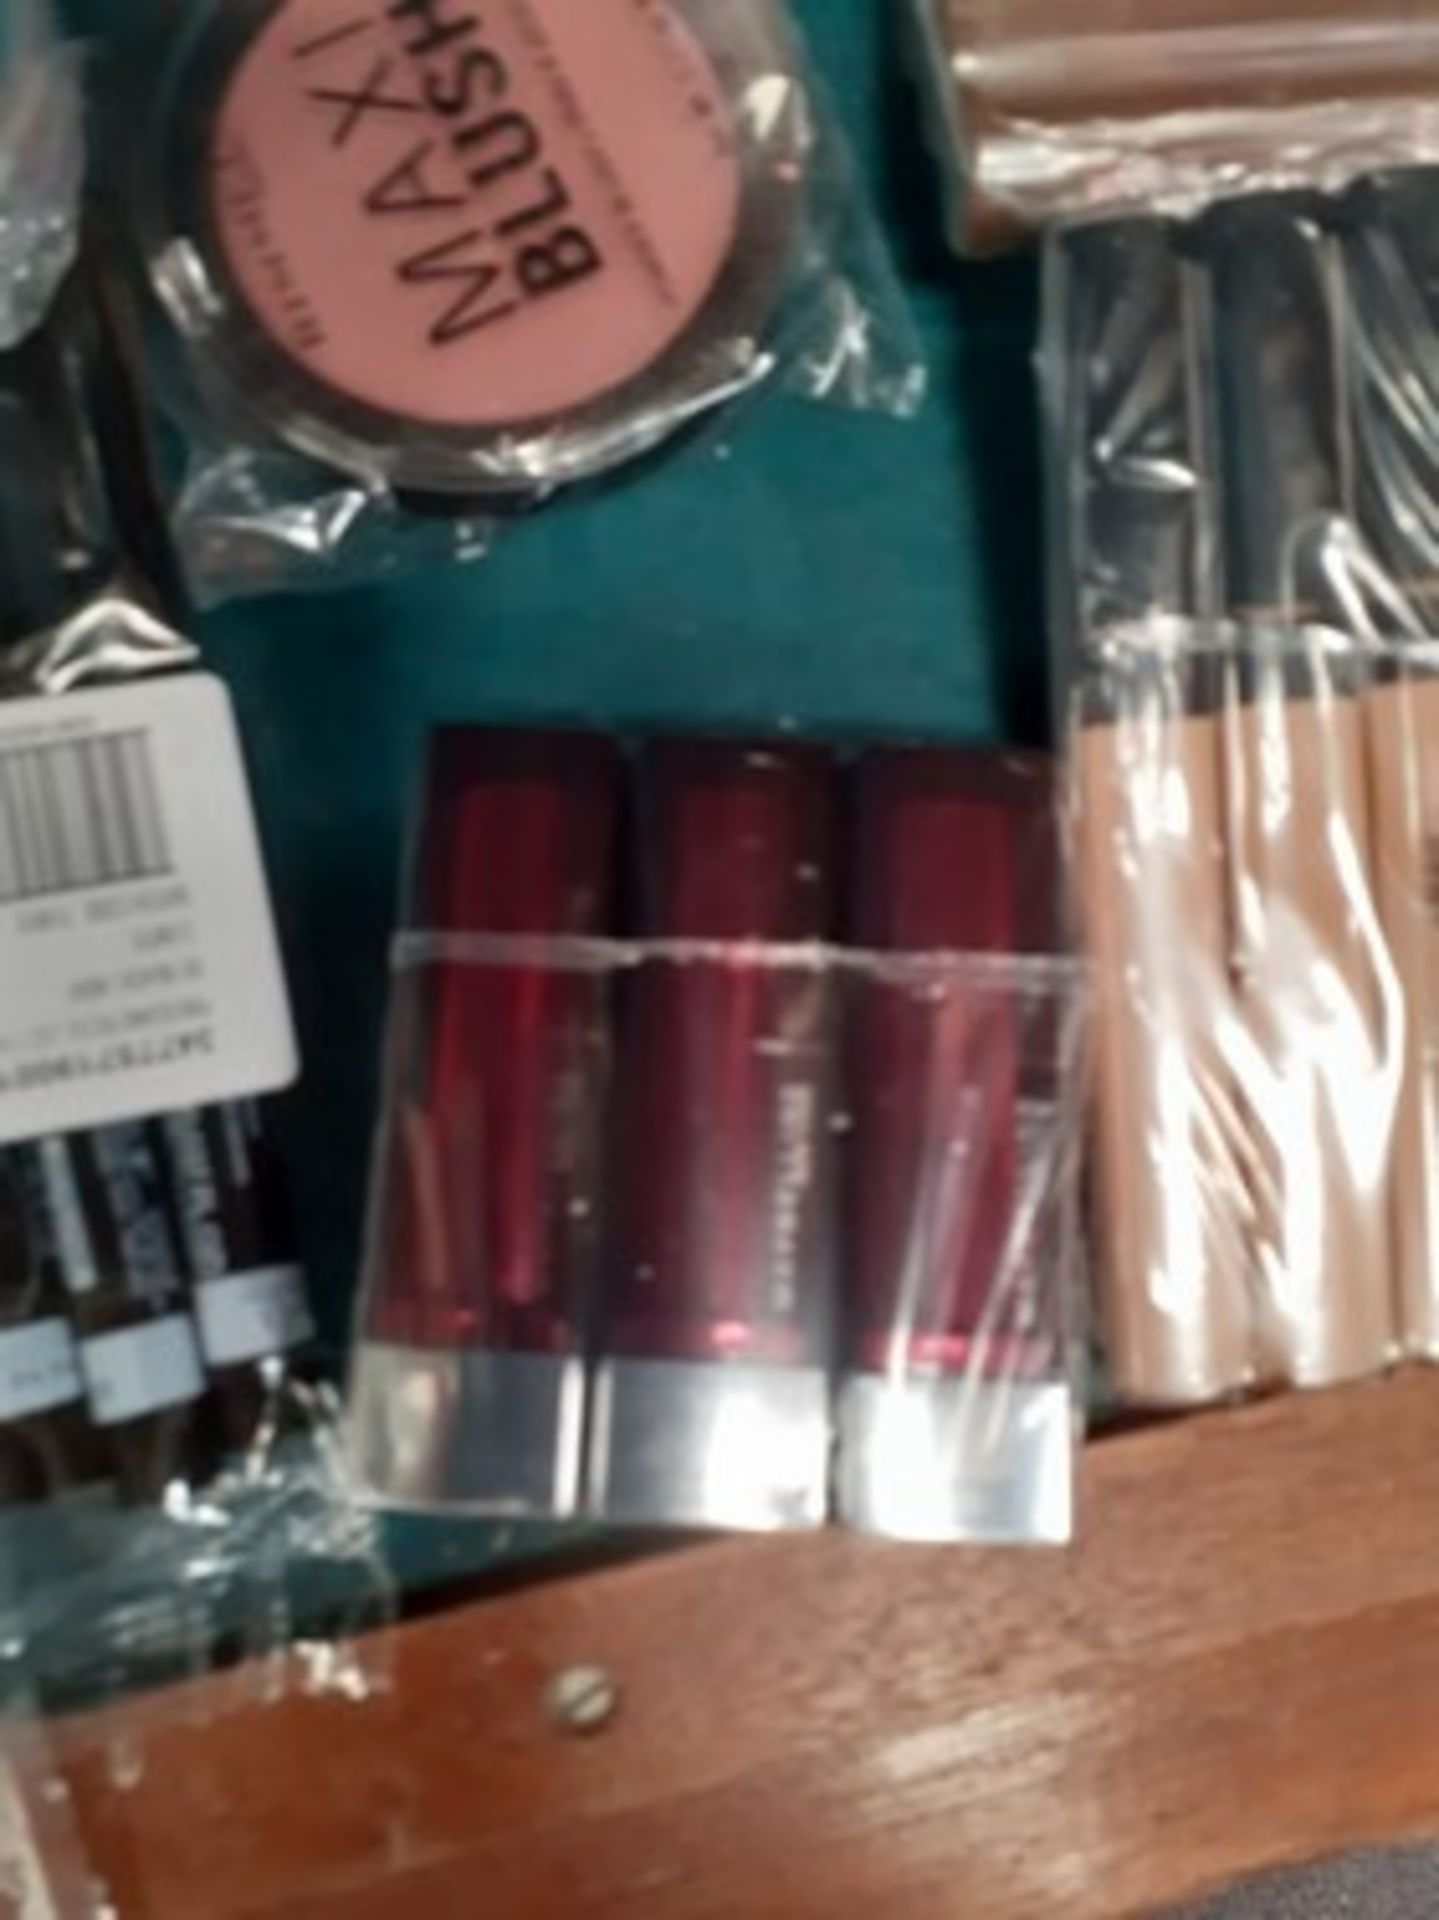 A good quantity of cosmetics by Maybelline, L'Oreal and Rimmel including, mascara, foundation, - Image 4 of 4